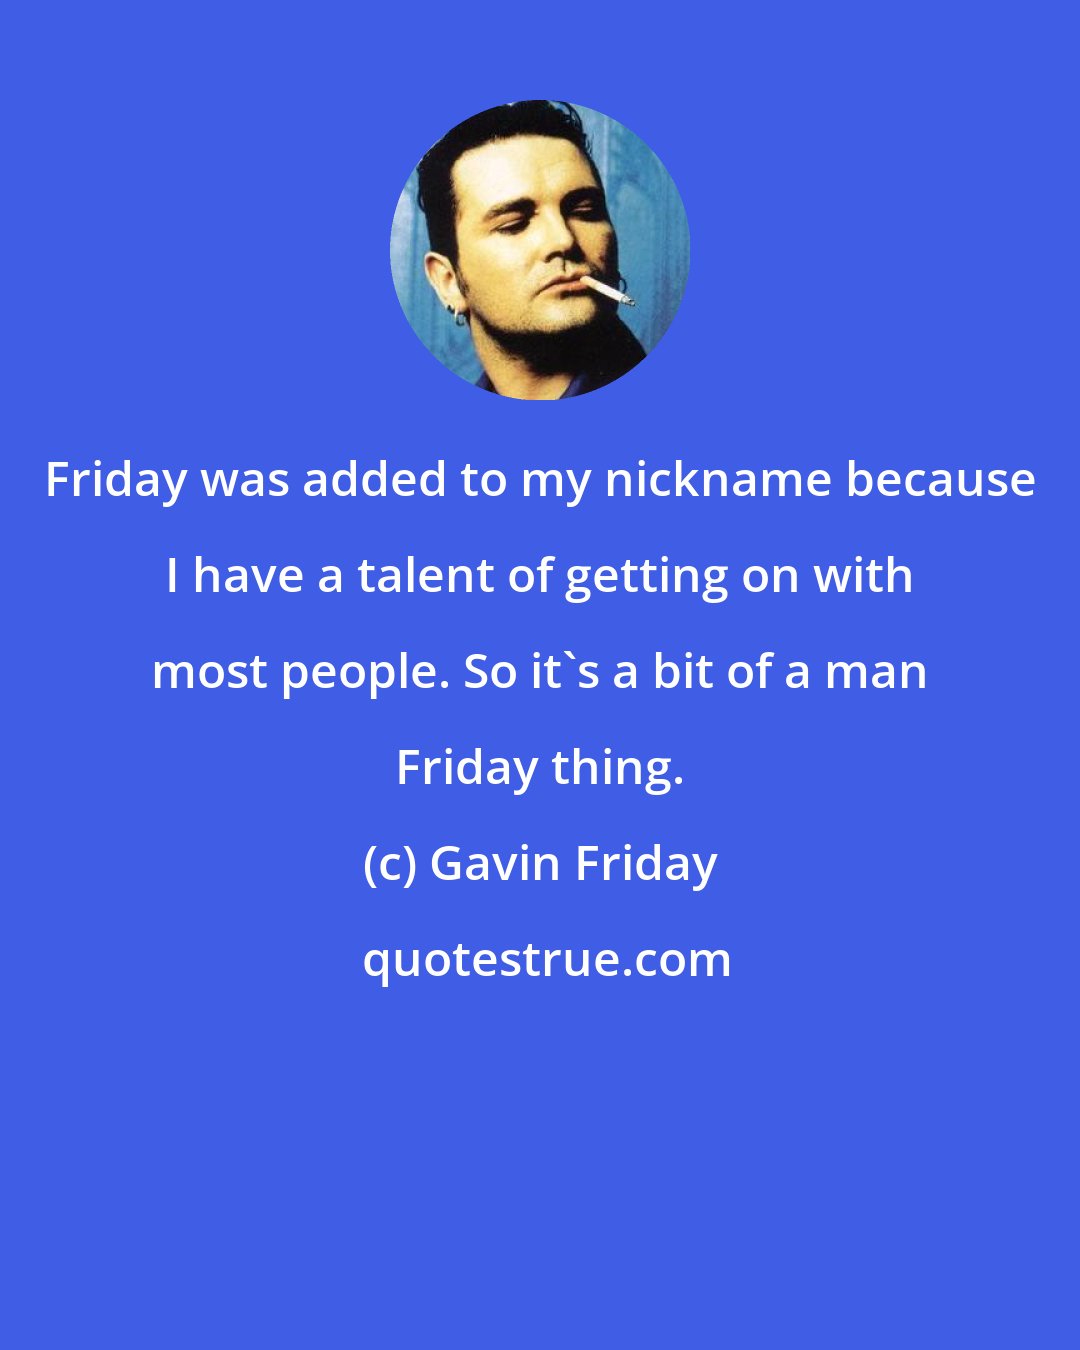 Gavin Friday: Friday was added to my nickname because I have a talent of getting on with most people. So it's a bit of a man Friday thing.